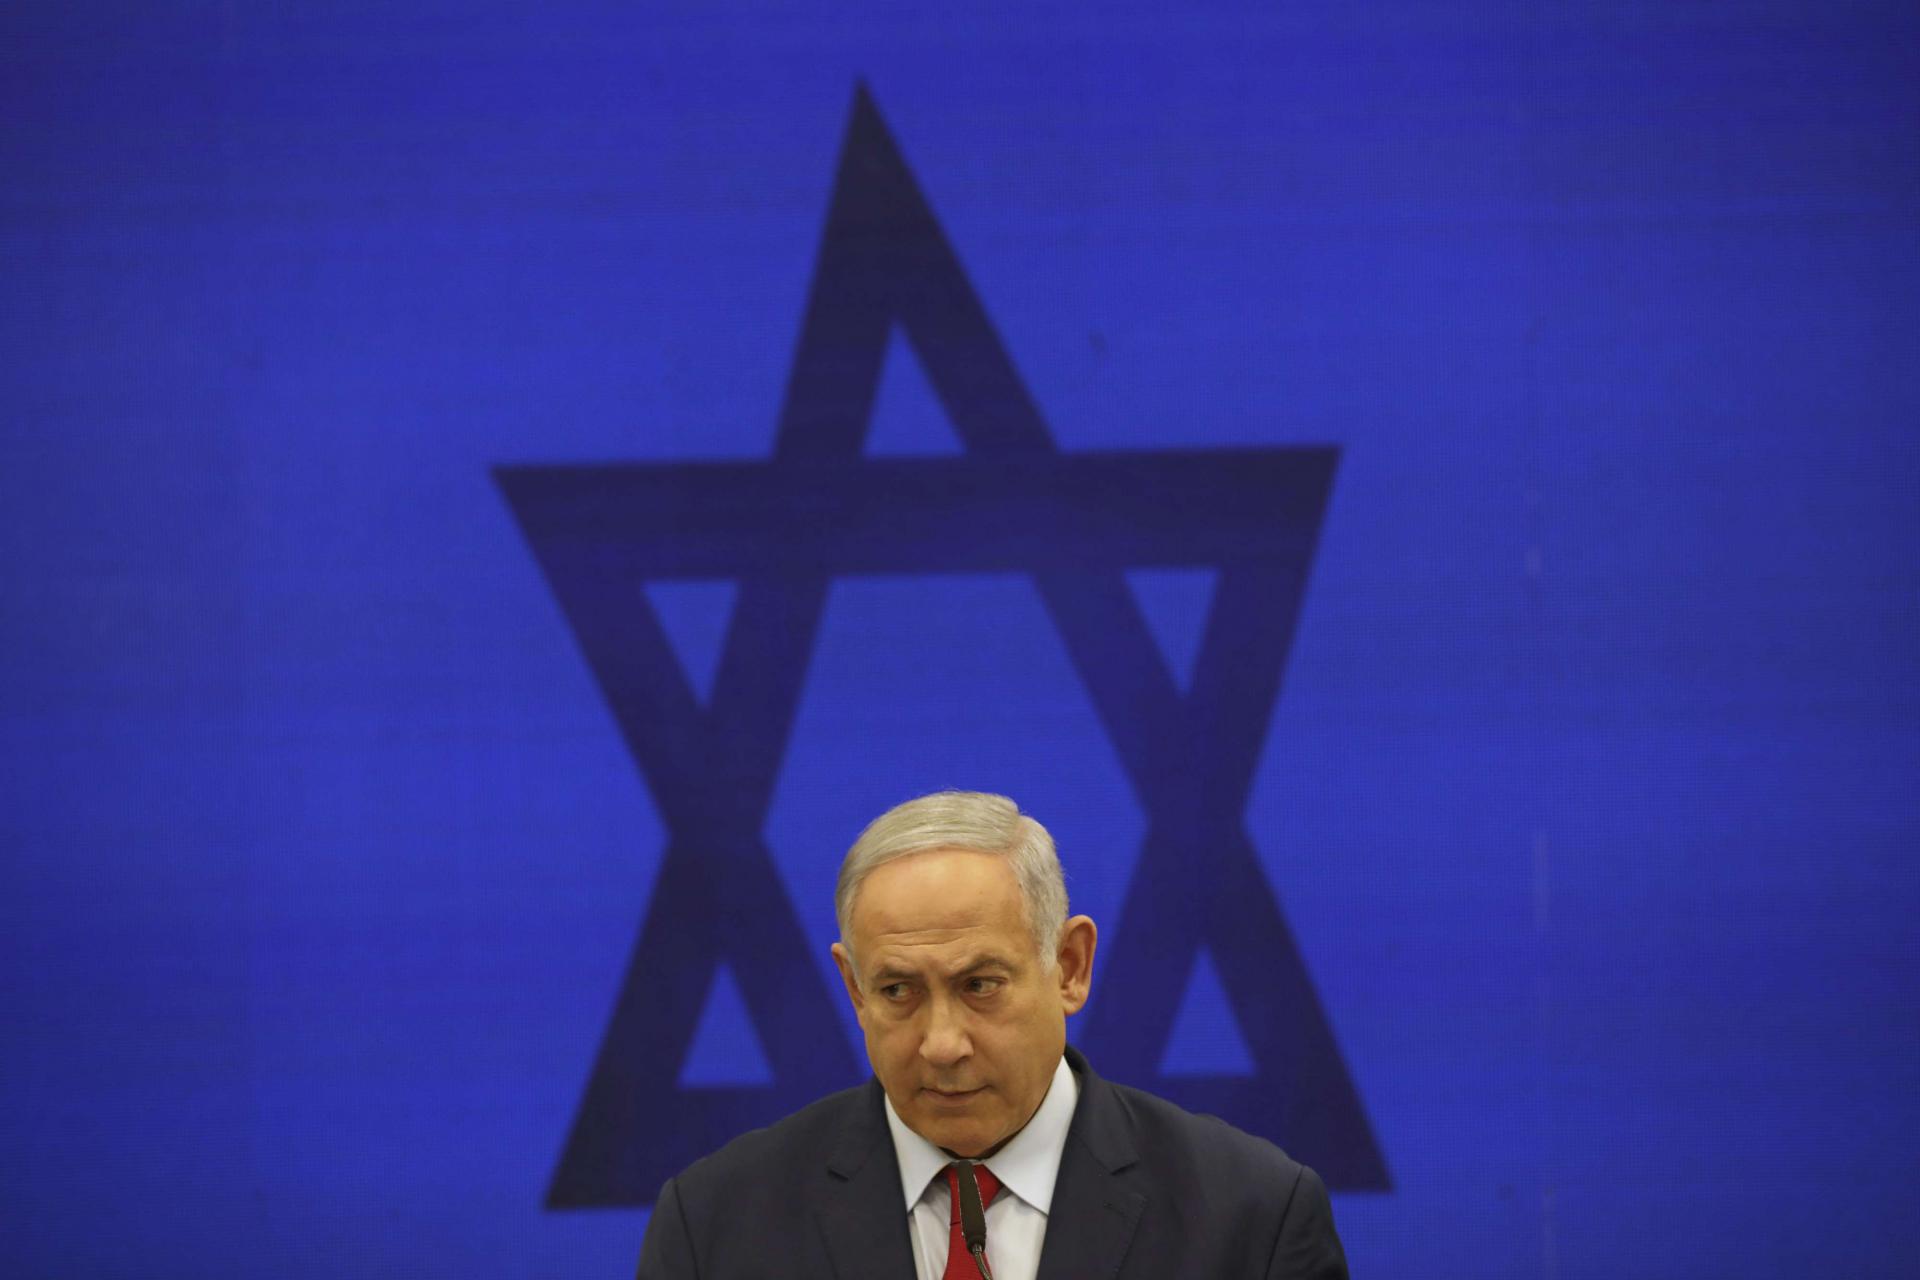 Netanyahu has pushed to energise his base, including through tactics critics say amount to racism